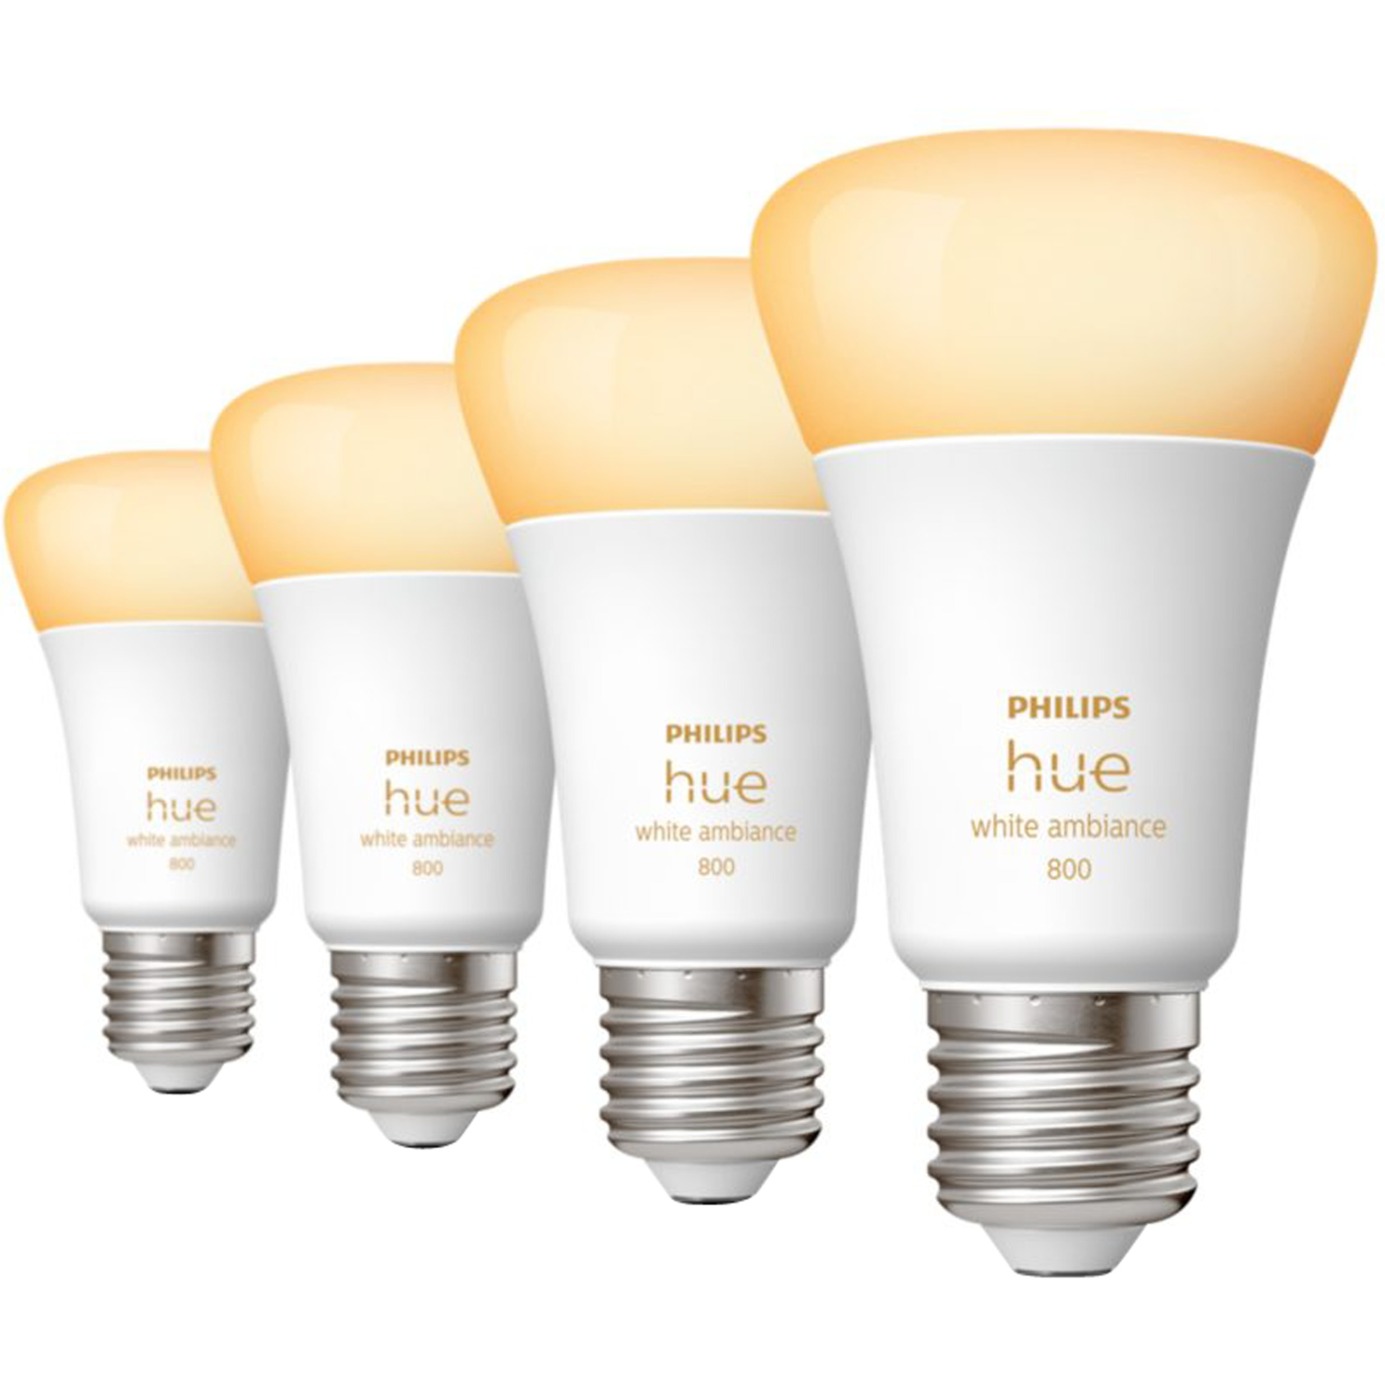 E27 Viererpack 4x570lm 60W, LED-Lampe von Philips Hue